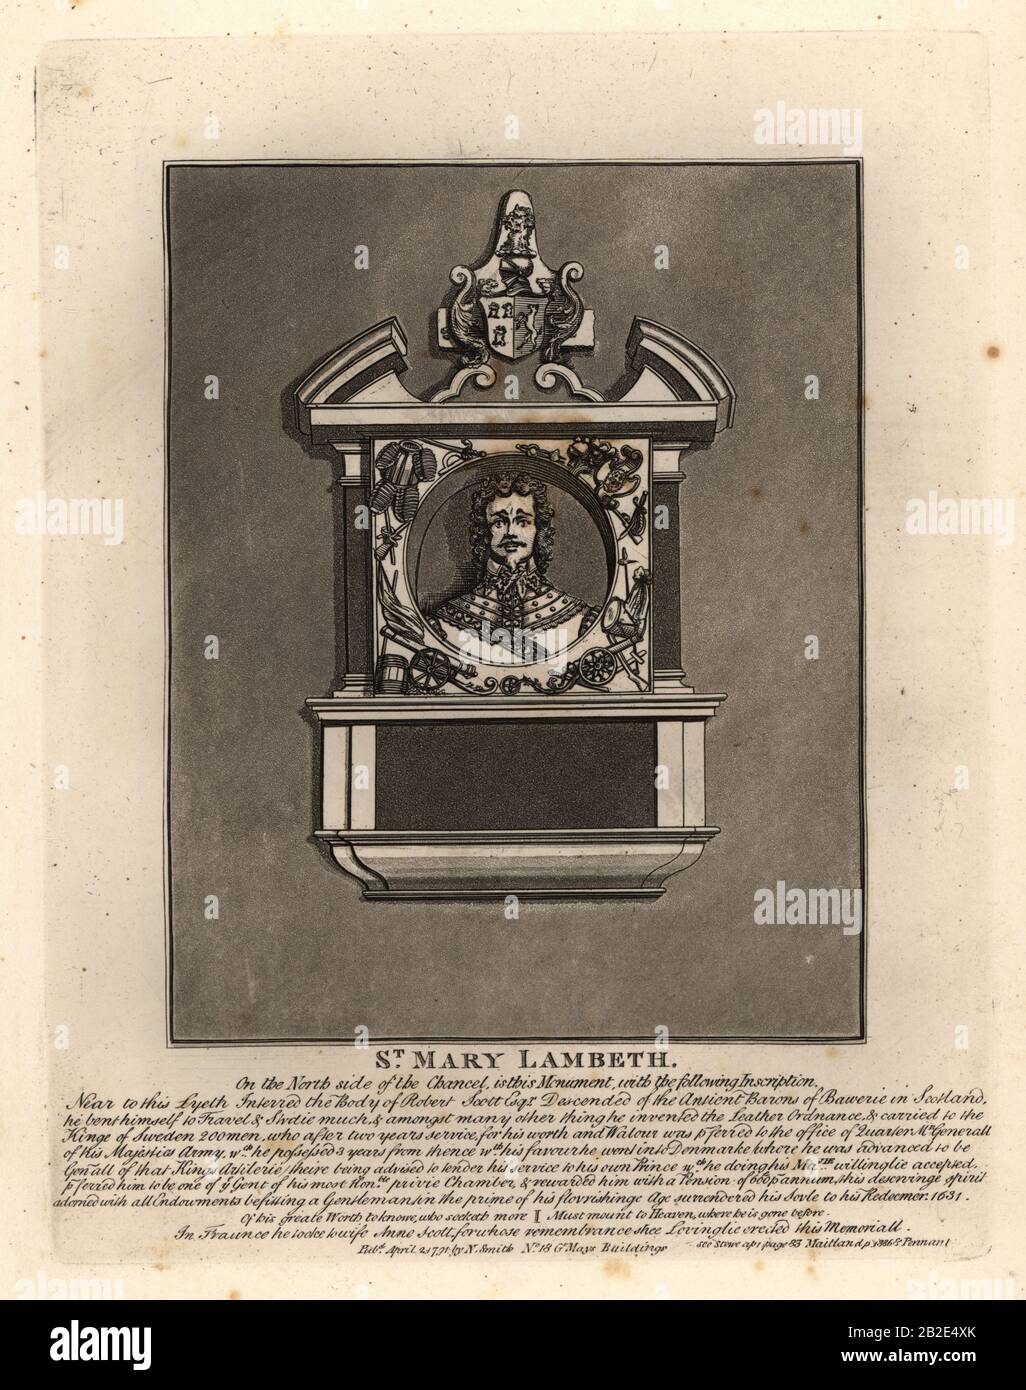 Grave effigy of Robert Scott, army officer in the Swedish and Danish services and military inventor, died 1631, St. Mary Lambeth. Copperplate engraving by John Thomas Smith after original drawings by members of the Society of Antiquaries from his J.T. Smith’s Antiquities of London and its Environs, J. Sewell, R. Folder, J. Simco, London, 1791. Stock Photo